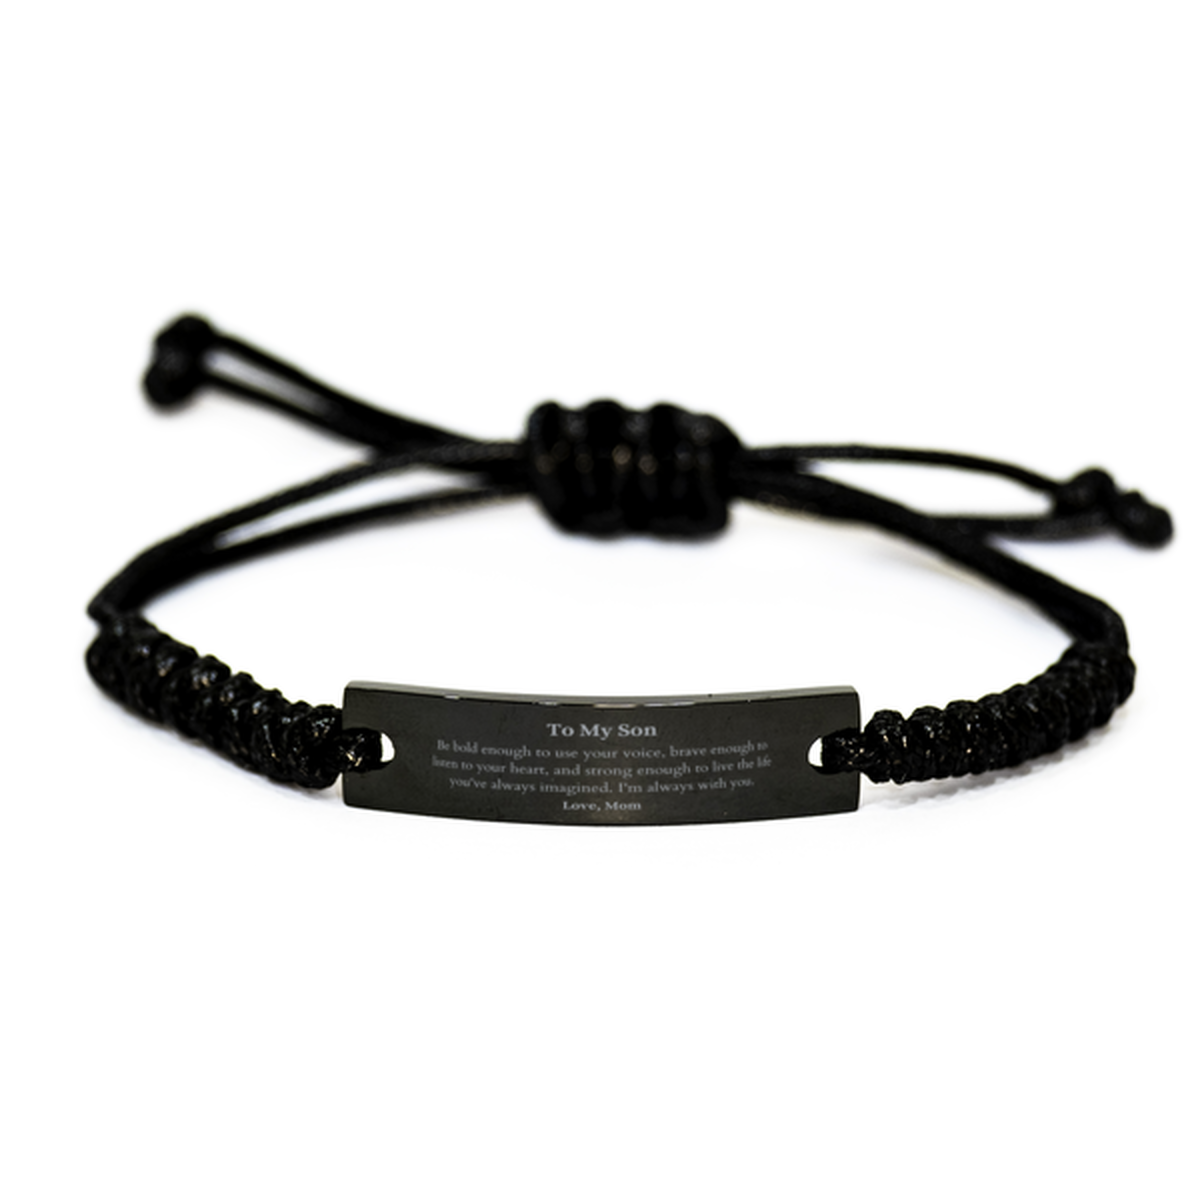 Keepsake Son Black Rope Bracelet Gift Idea Graduation Christmas Birthday Son from Mom, Son Be bold enough to use your voice, brave enough to listen to your heart. Love, Mom